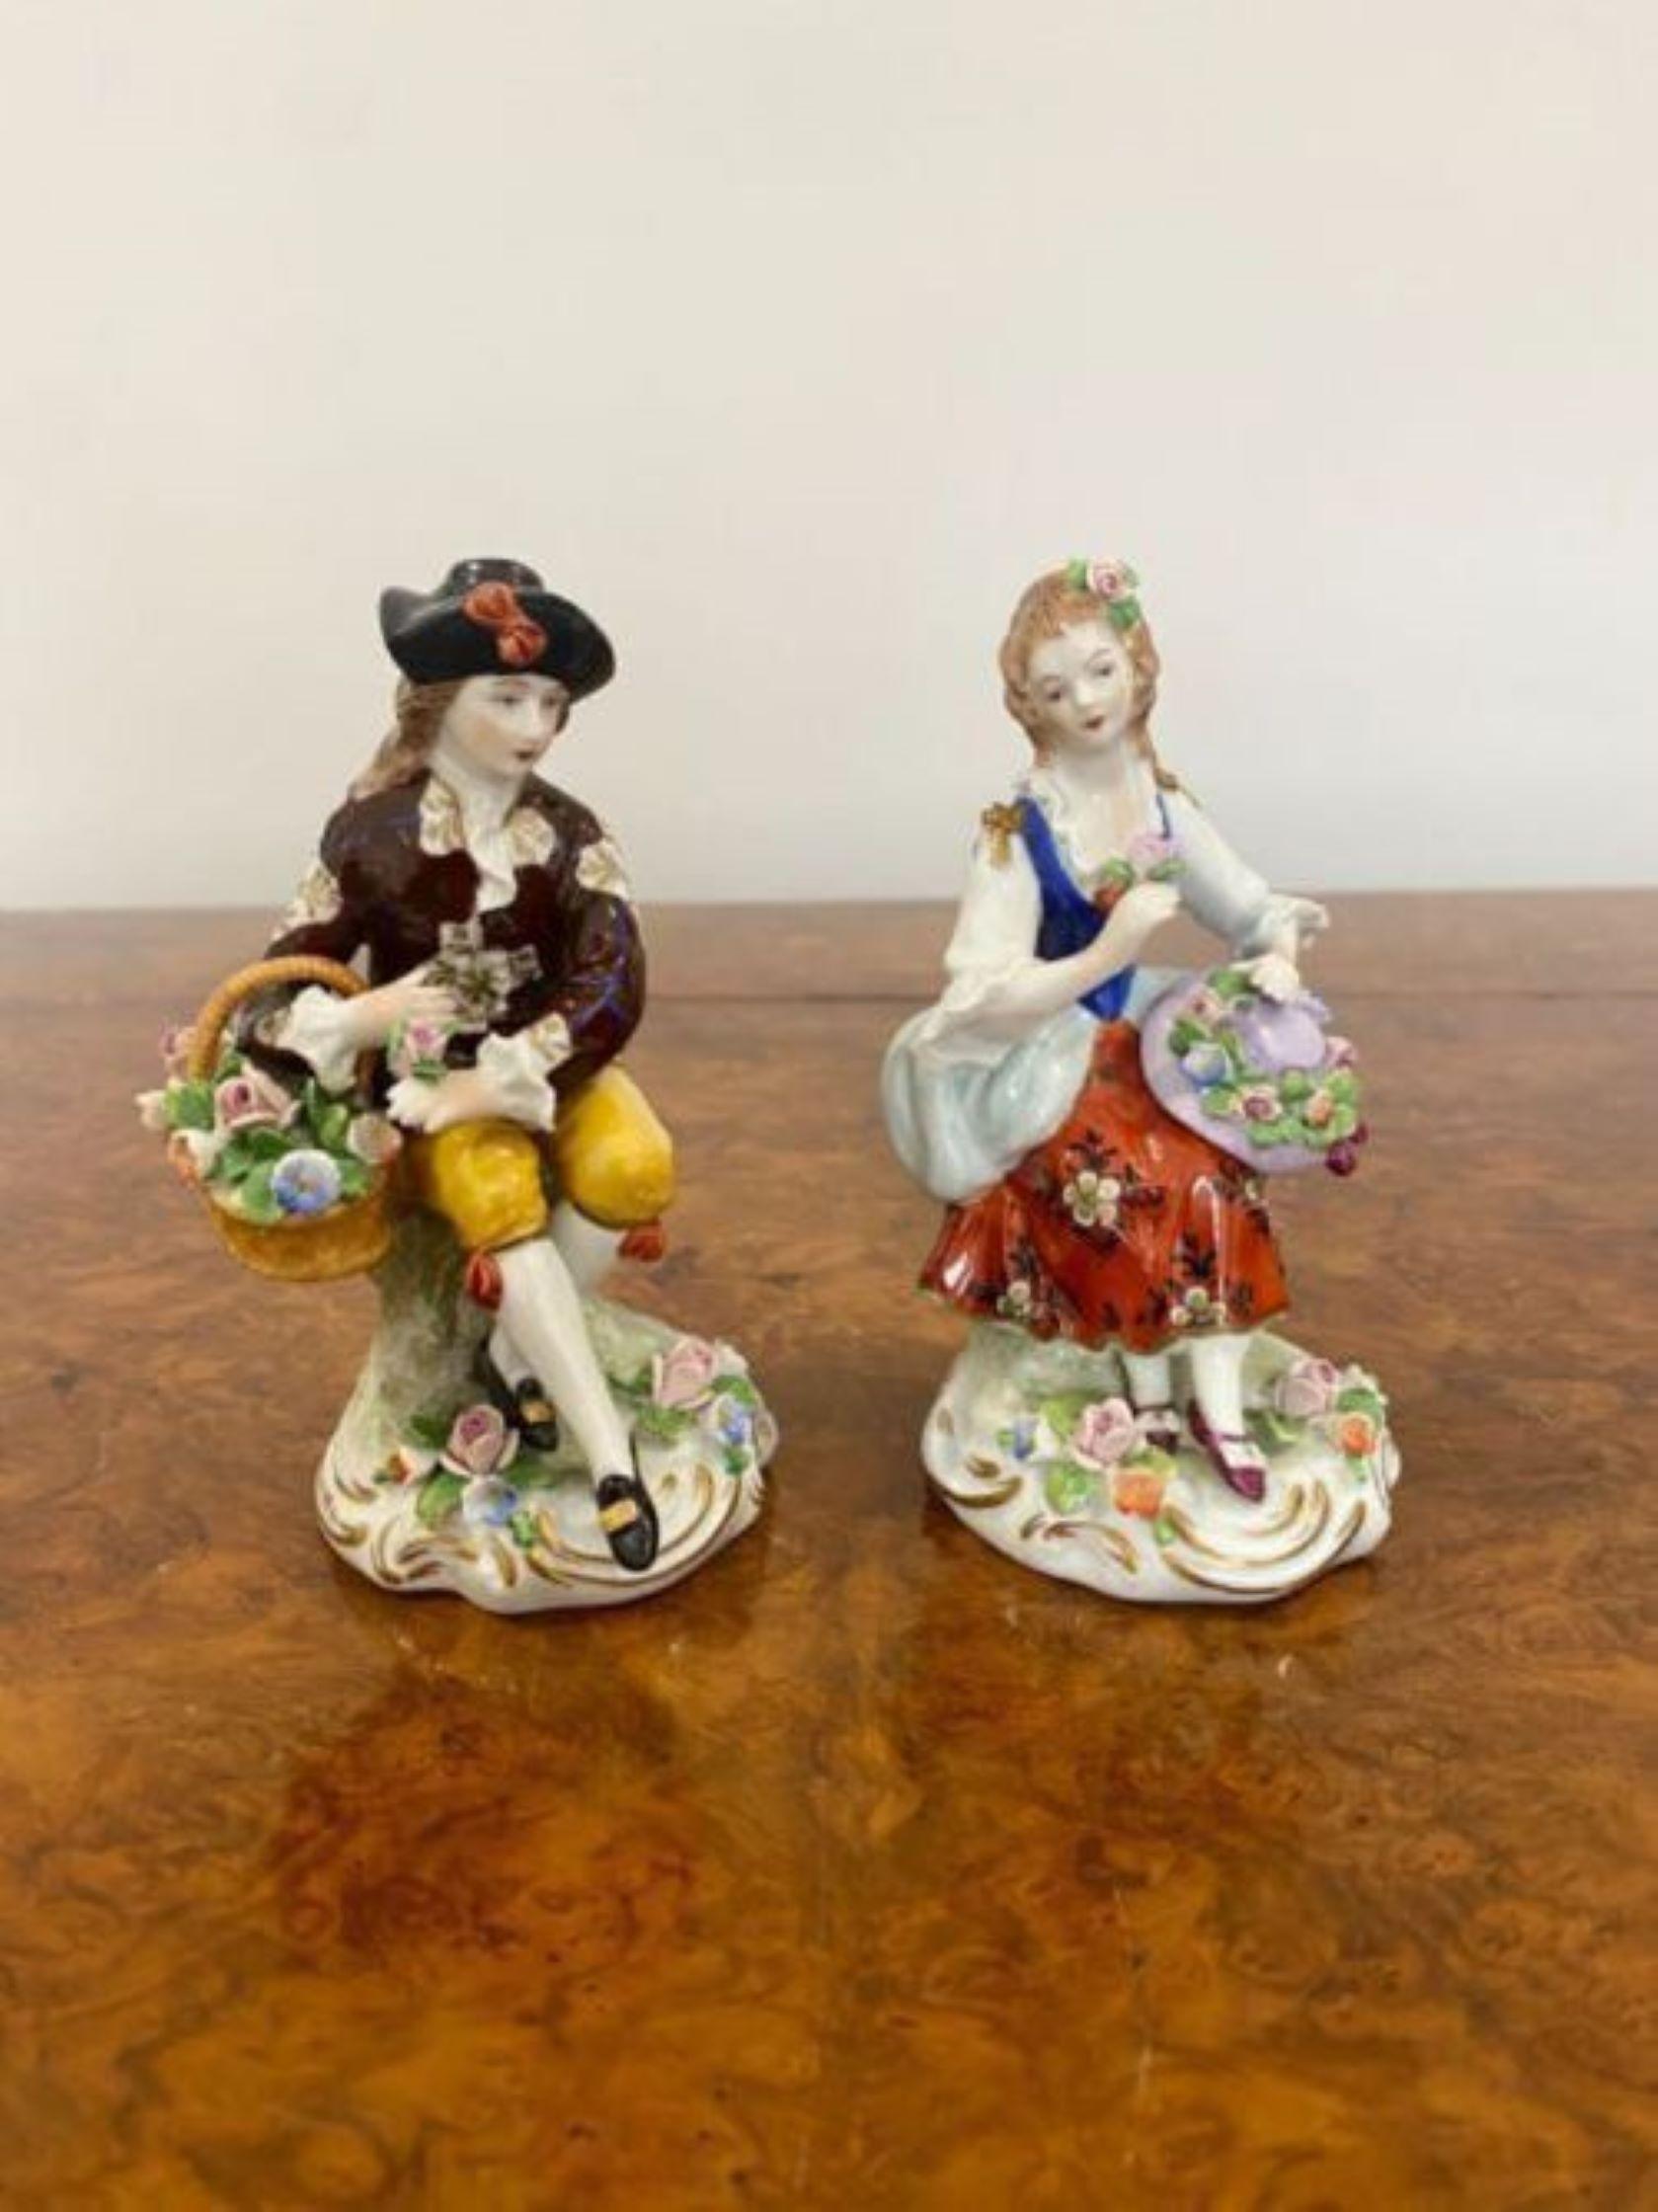 Pair of antique continental porcelain figures holding a basket of flowers and a hat in wonderful green, red, blue, yellow and white colours